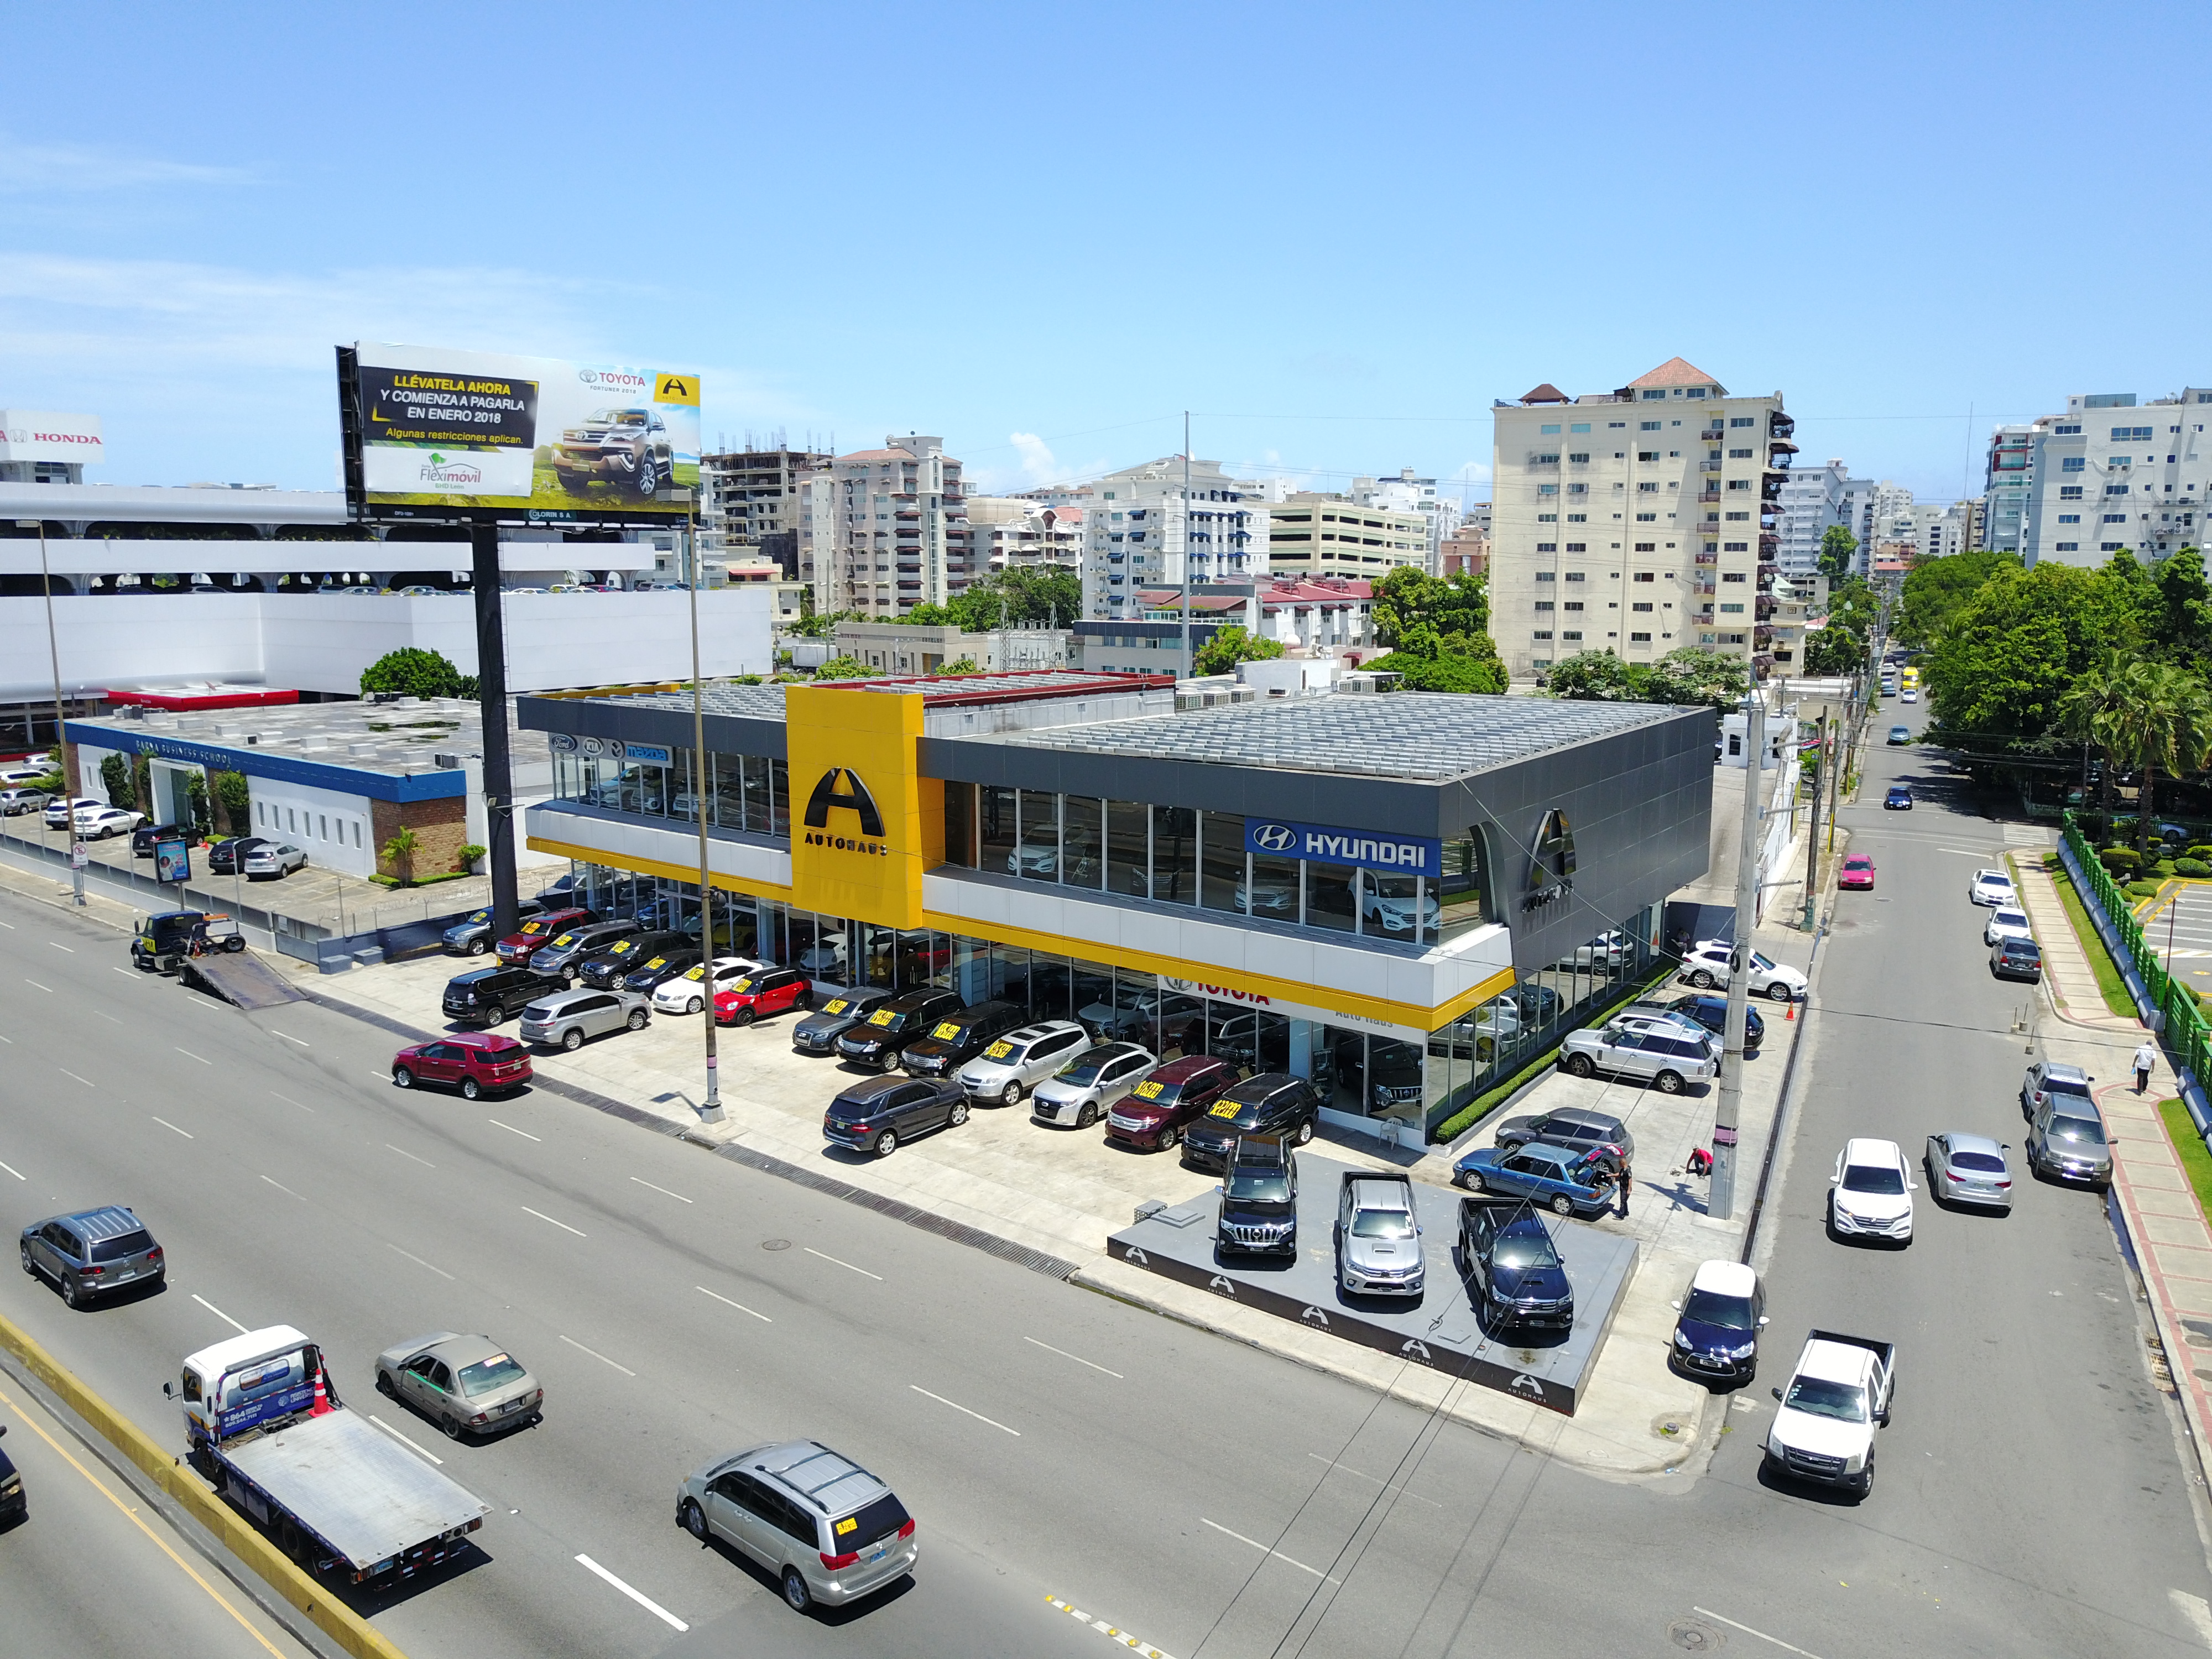 Autohaus showroom, has a building in metal structures built by Ingenieria Metalica.